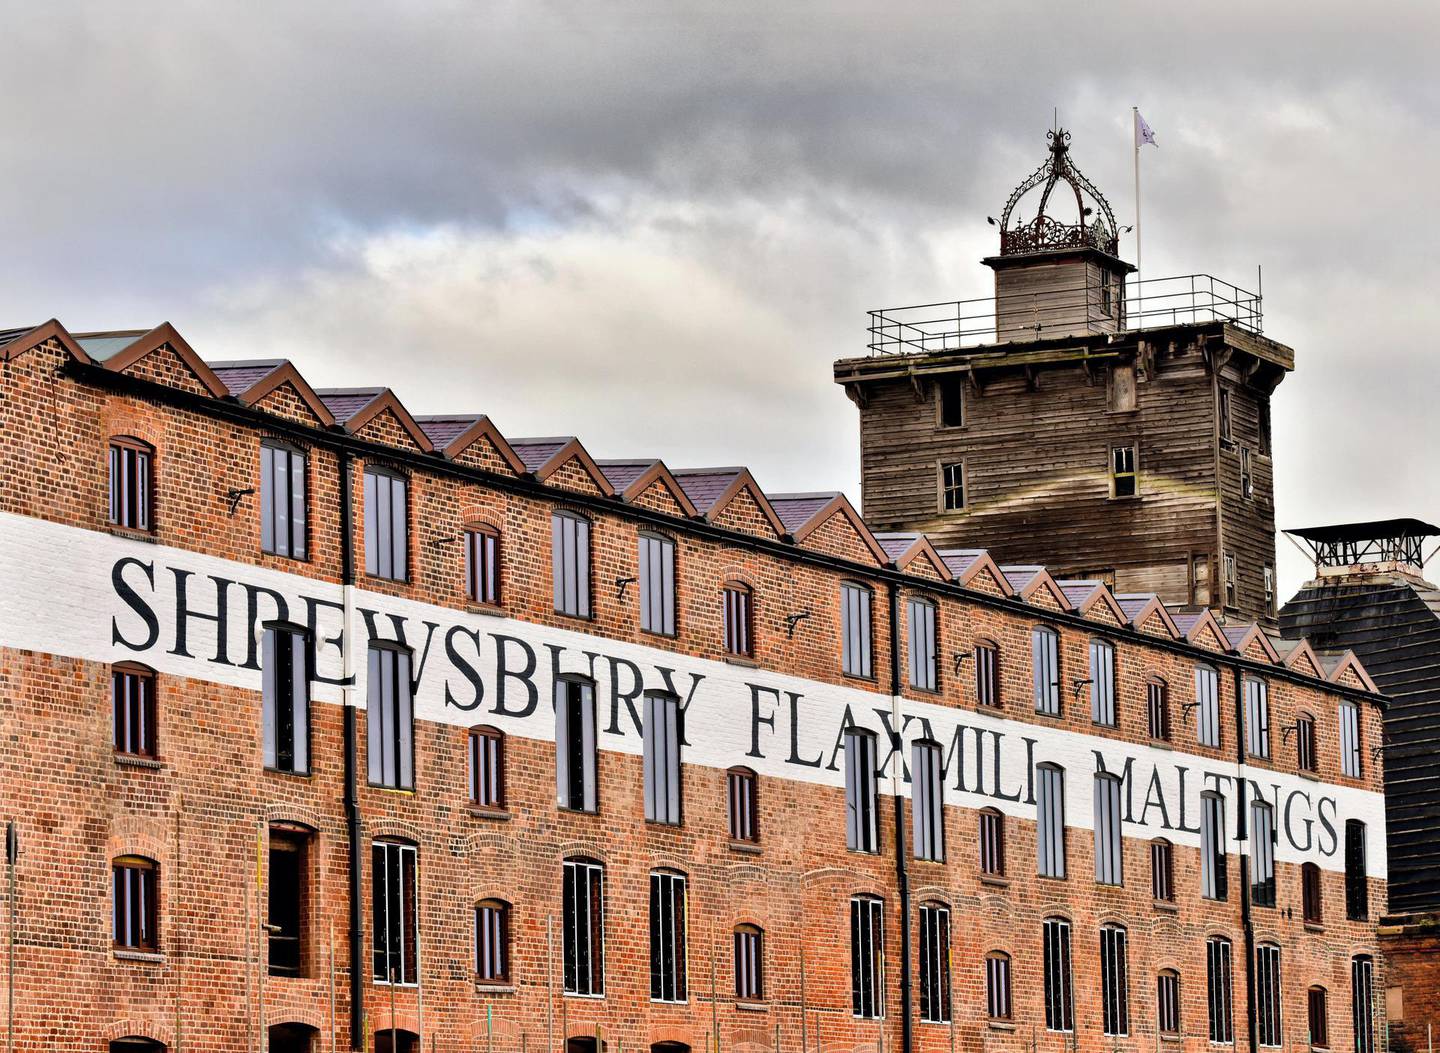 PYEX0M Restoration of the Shrewsbury Flaxmill Maltings continues. Built in 1797, it was the world's first Iron frame building, Shropshire, England, UK.